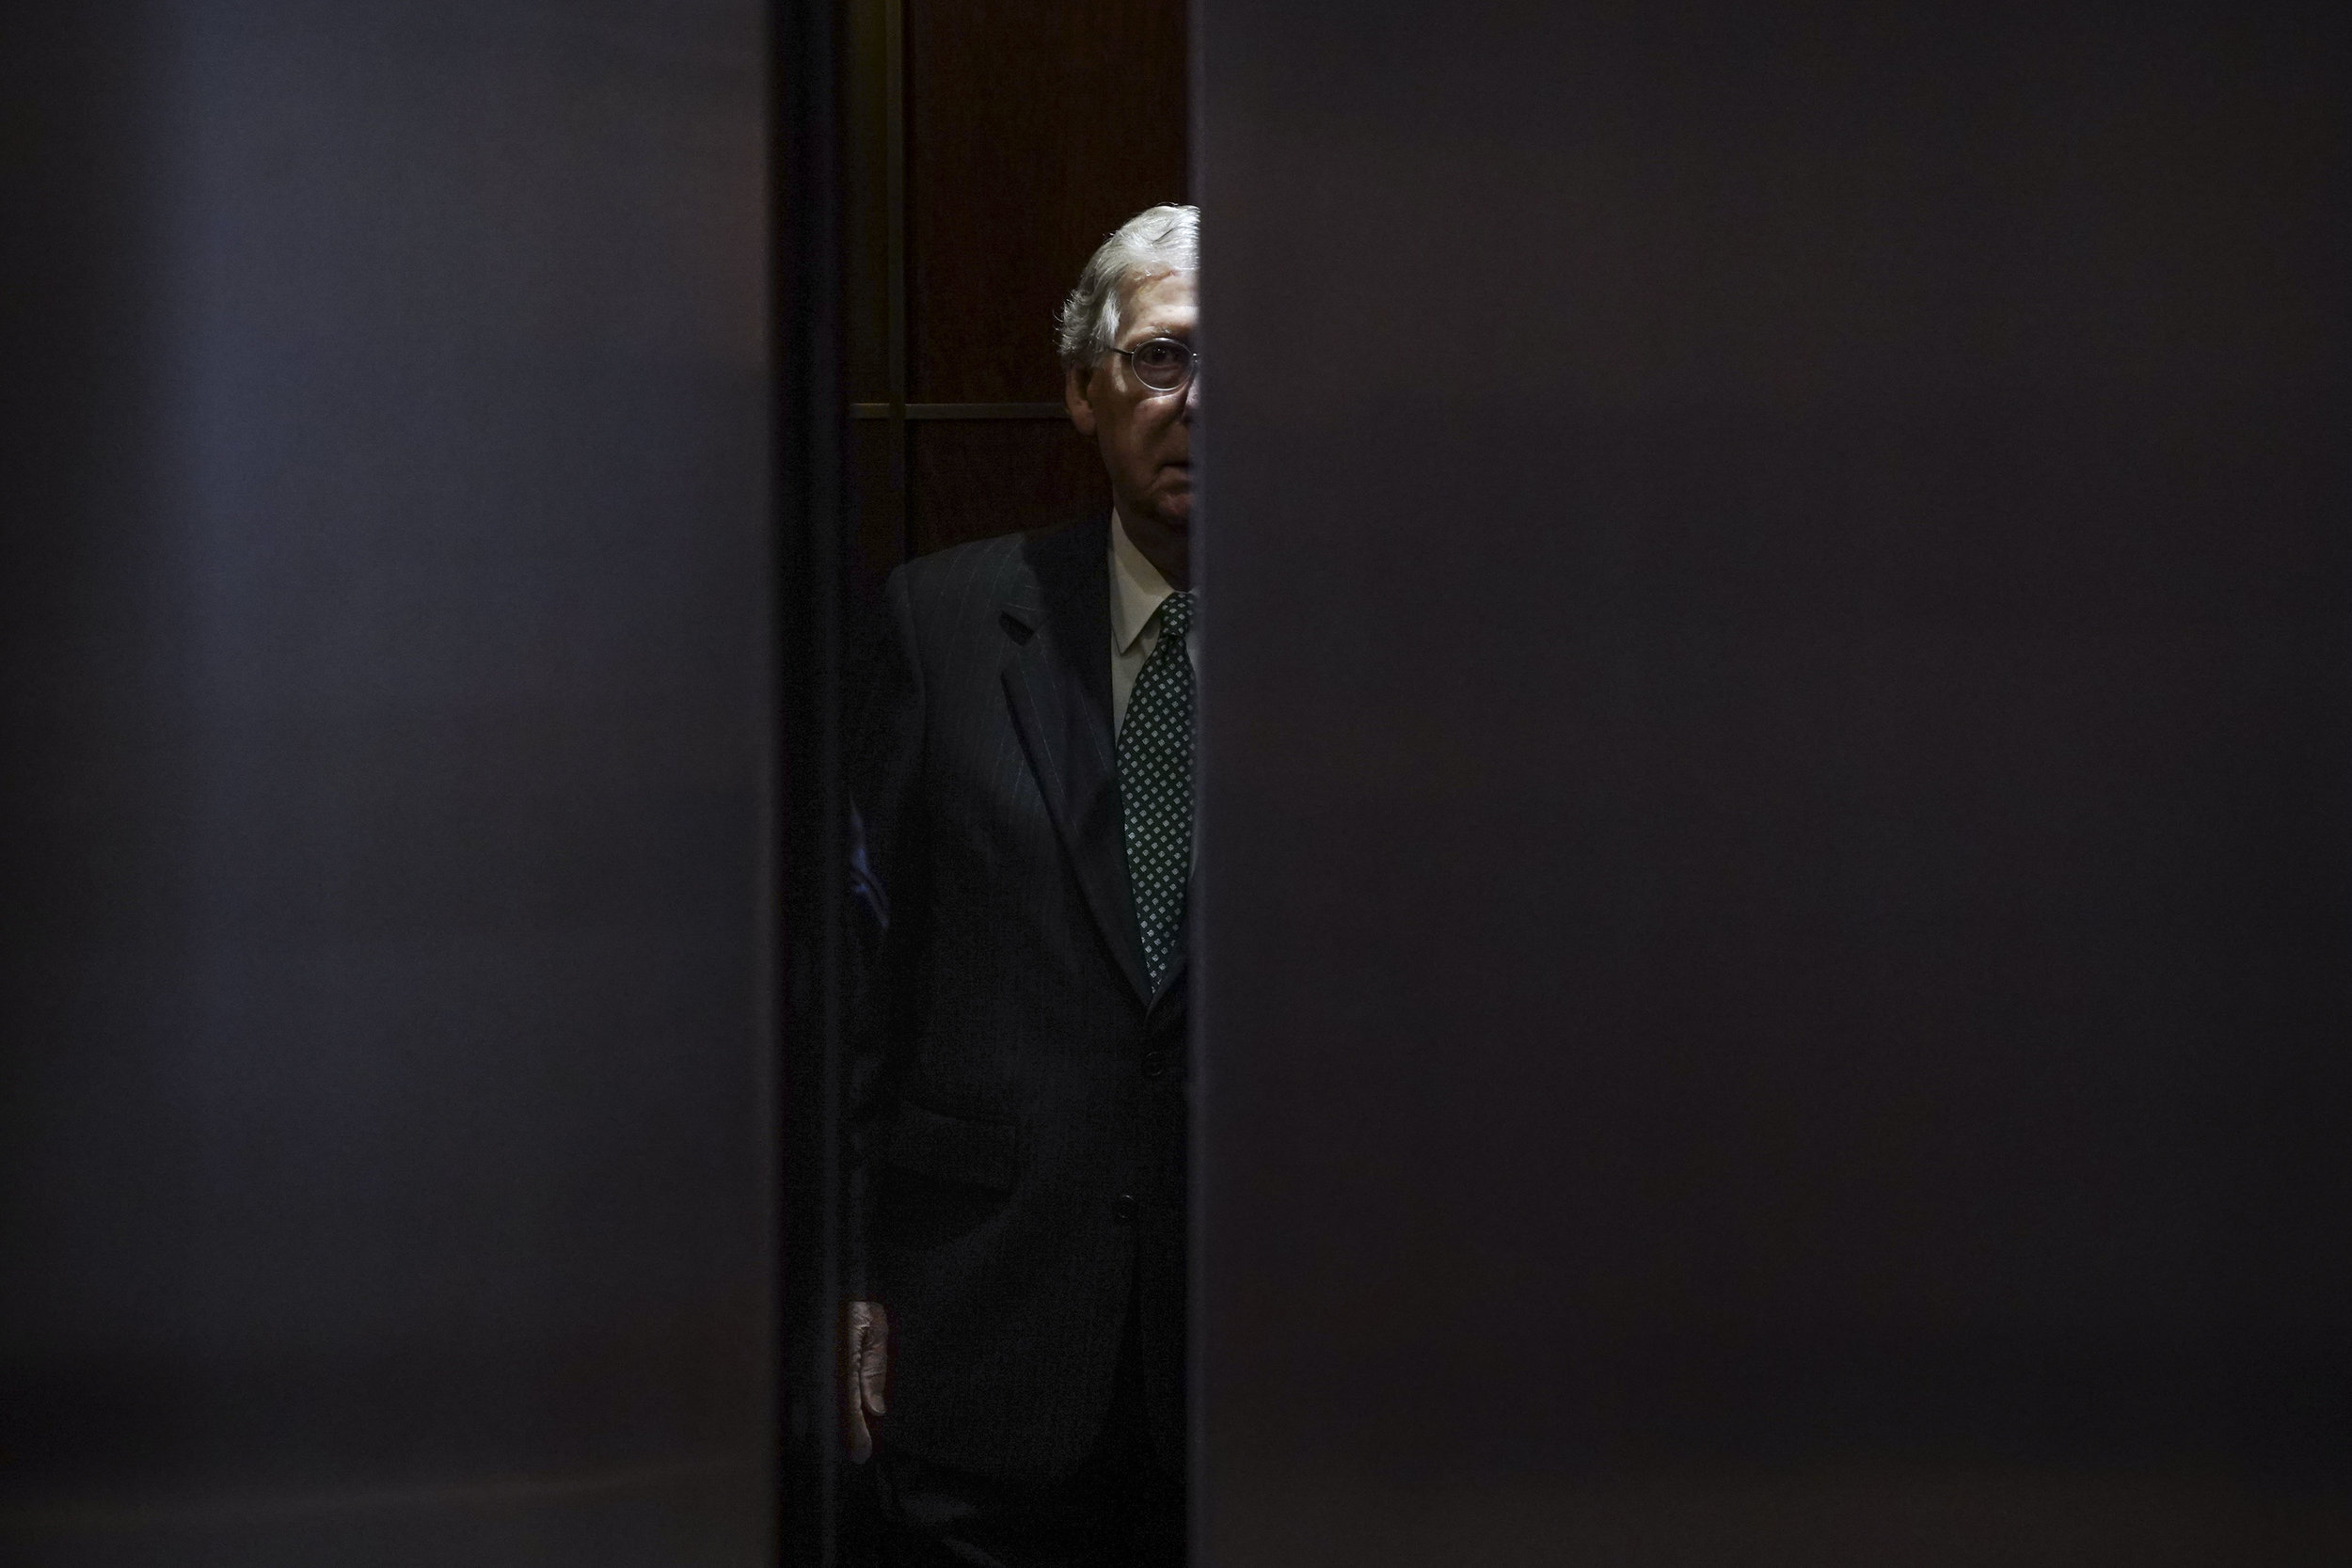   Senate Majority Leader Mitch McConnell arrives for the so-called "Gang of Eight" classified briefing on Capitol Hill.  